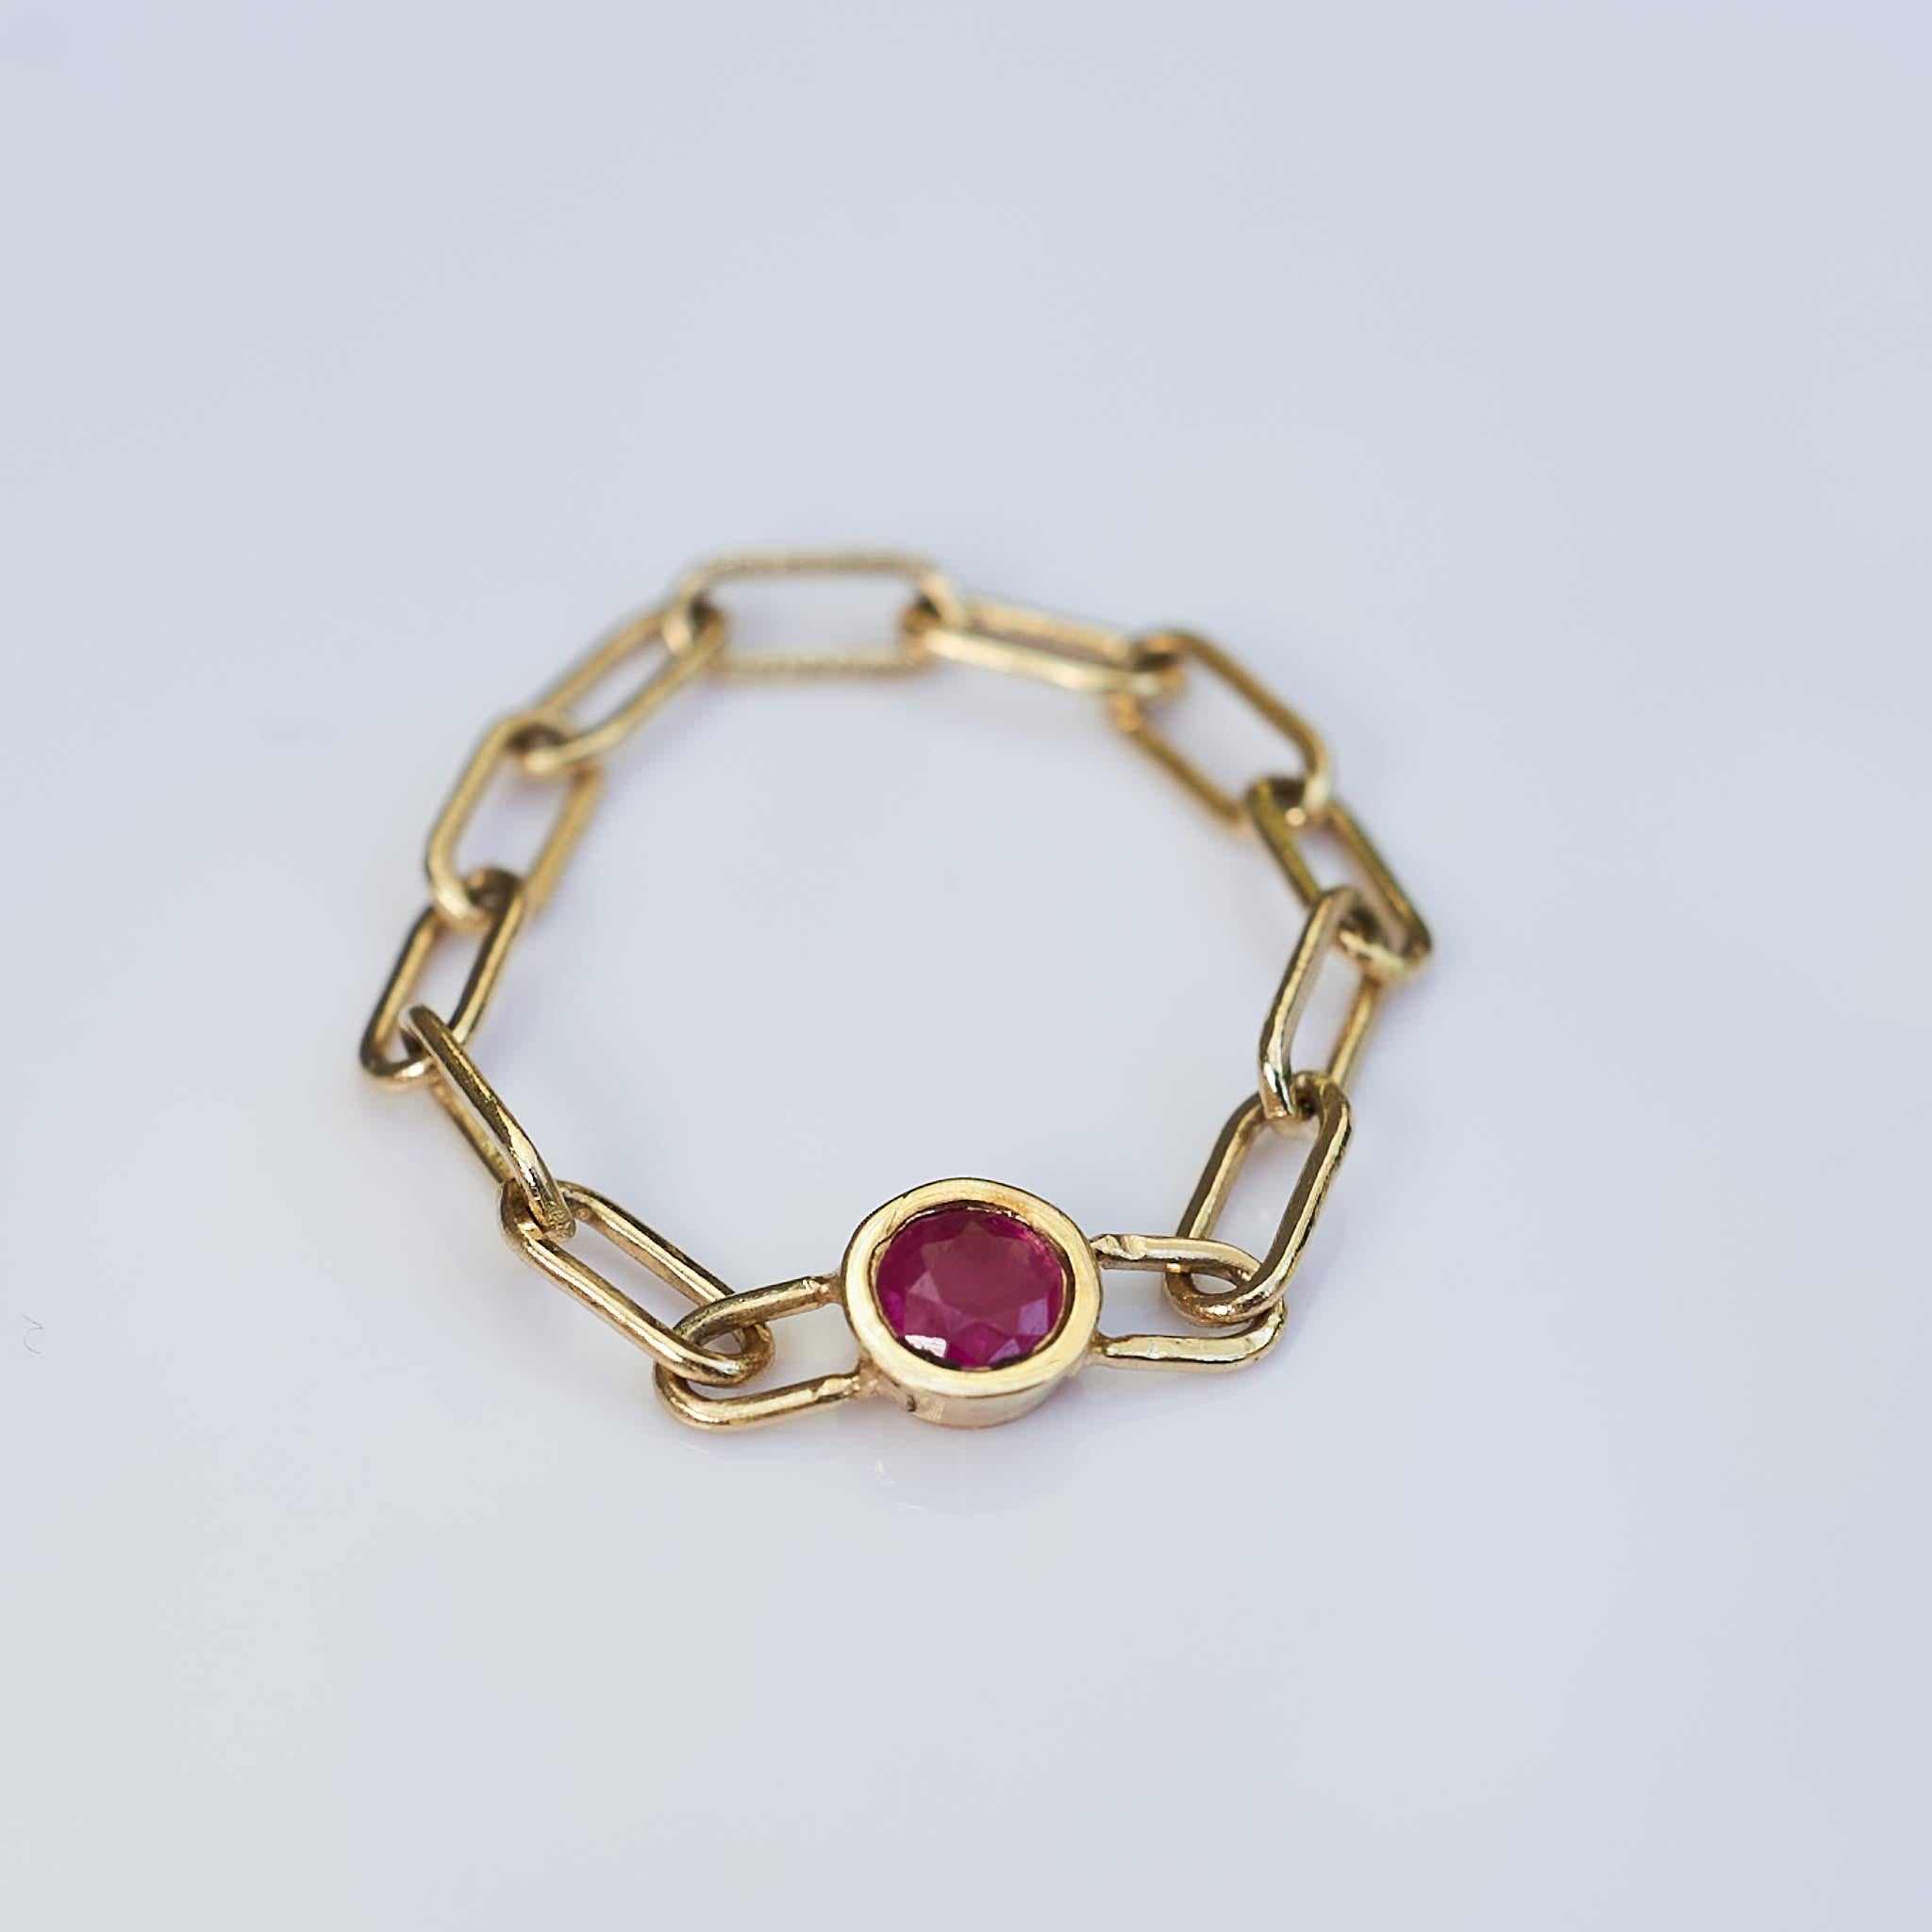 Contemporary Pink Tourmaline Ring Chain Ring Gold J Dauphin For Sale